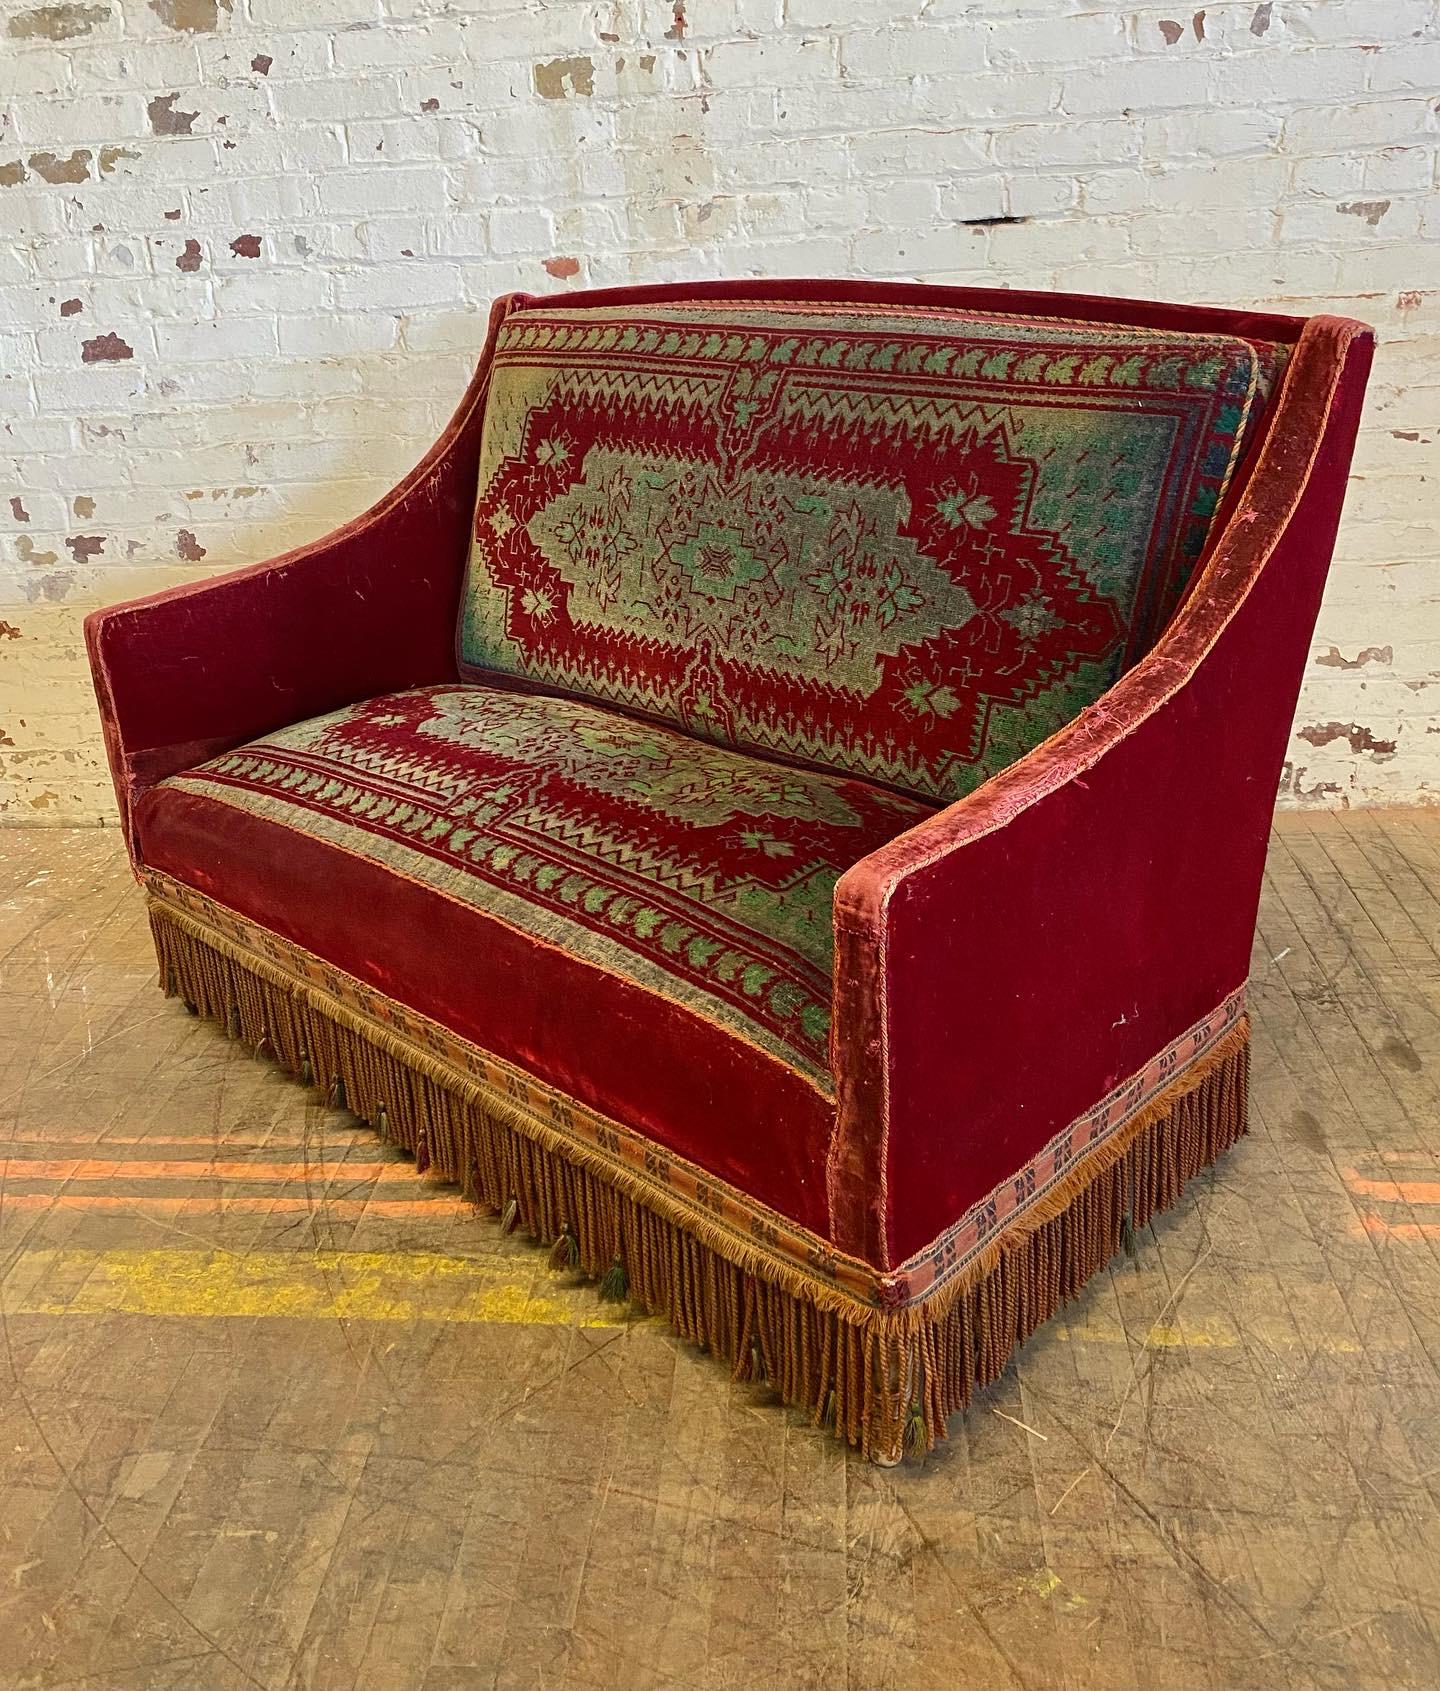 Stunning Mohair Russian Stylized Settee embossed tapestry fabric,,Great form and style.. Retains original mohair,, embossed,, fringe,,Age appropriate wear..Hand delivery avail to New York City or anywhere en route from Buffalo NY.